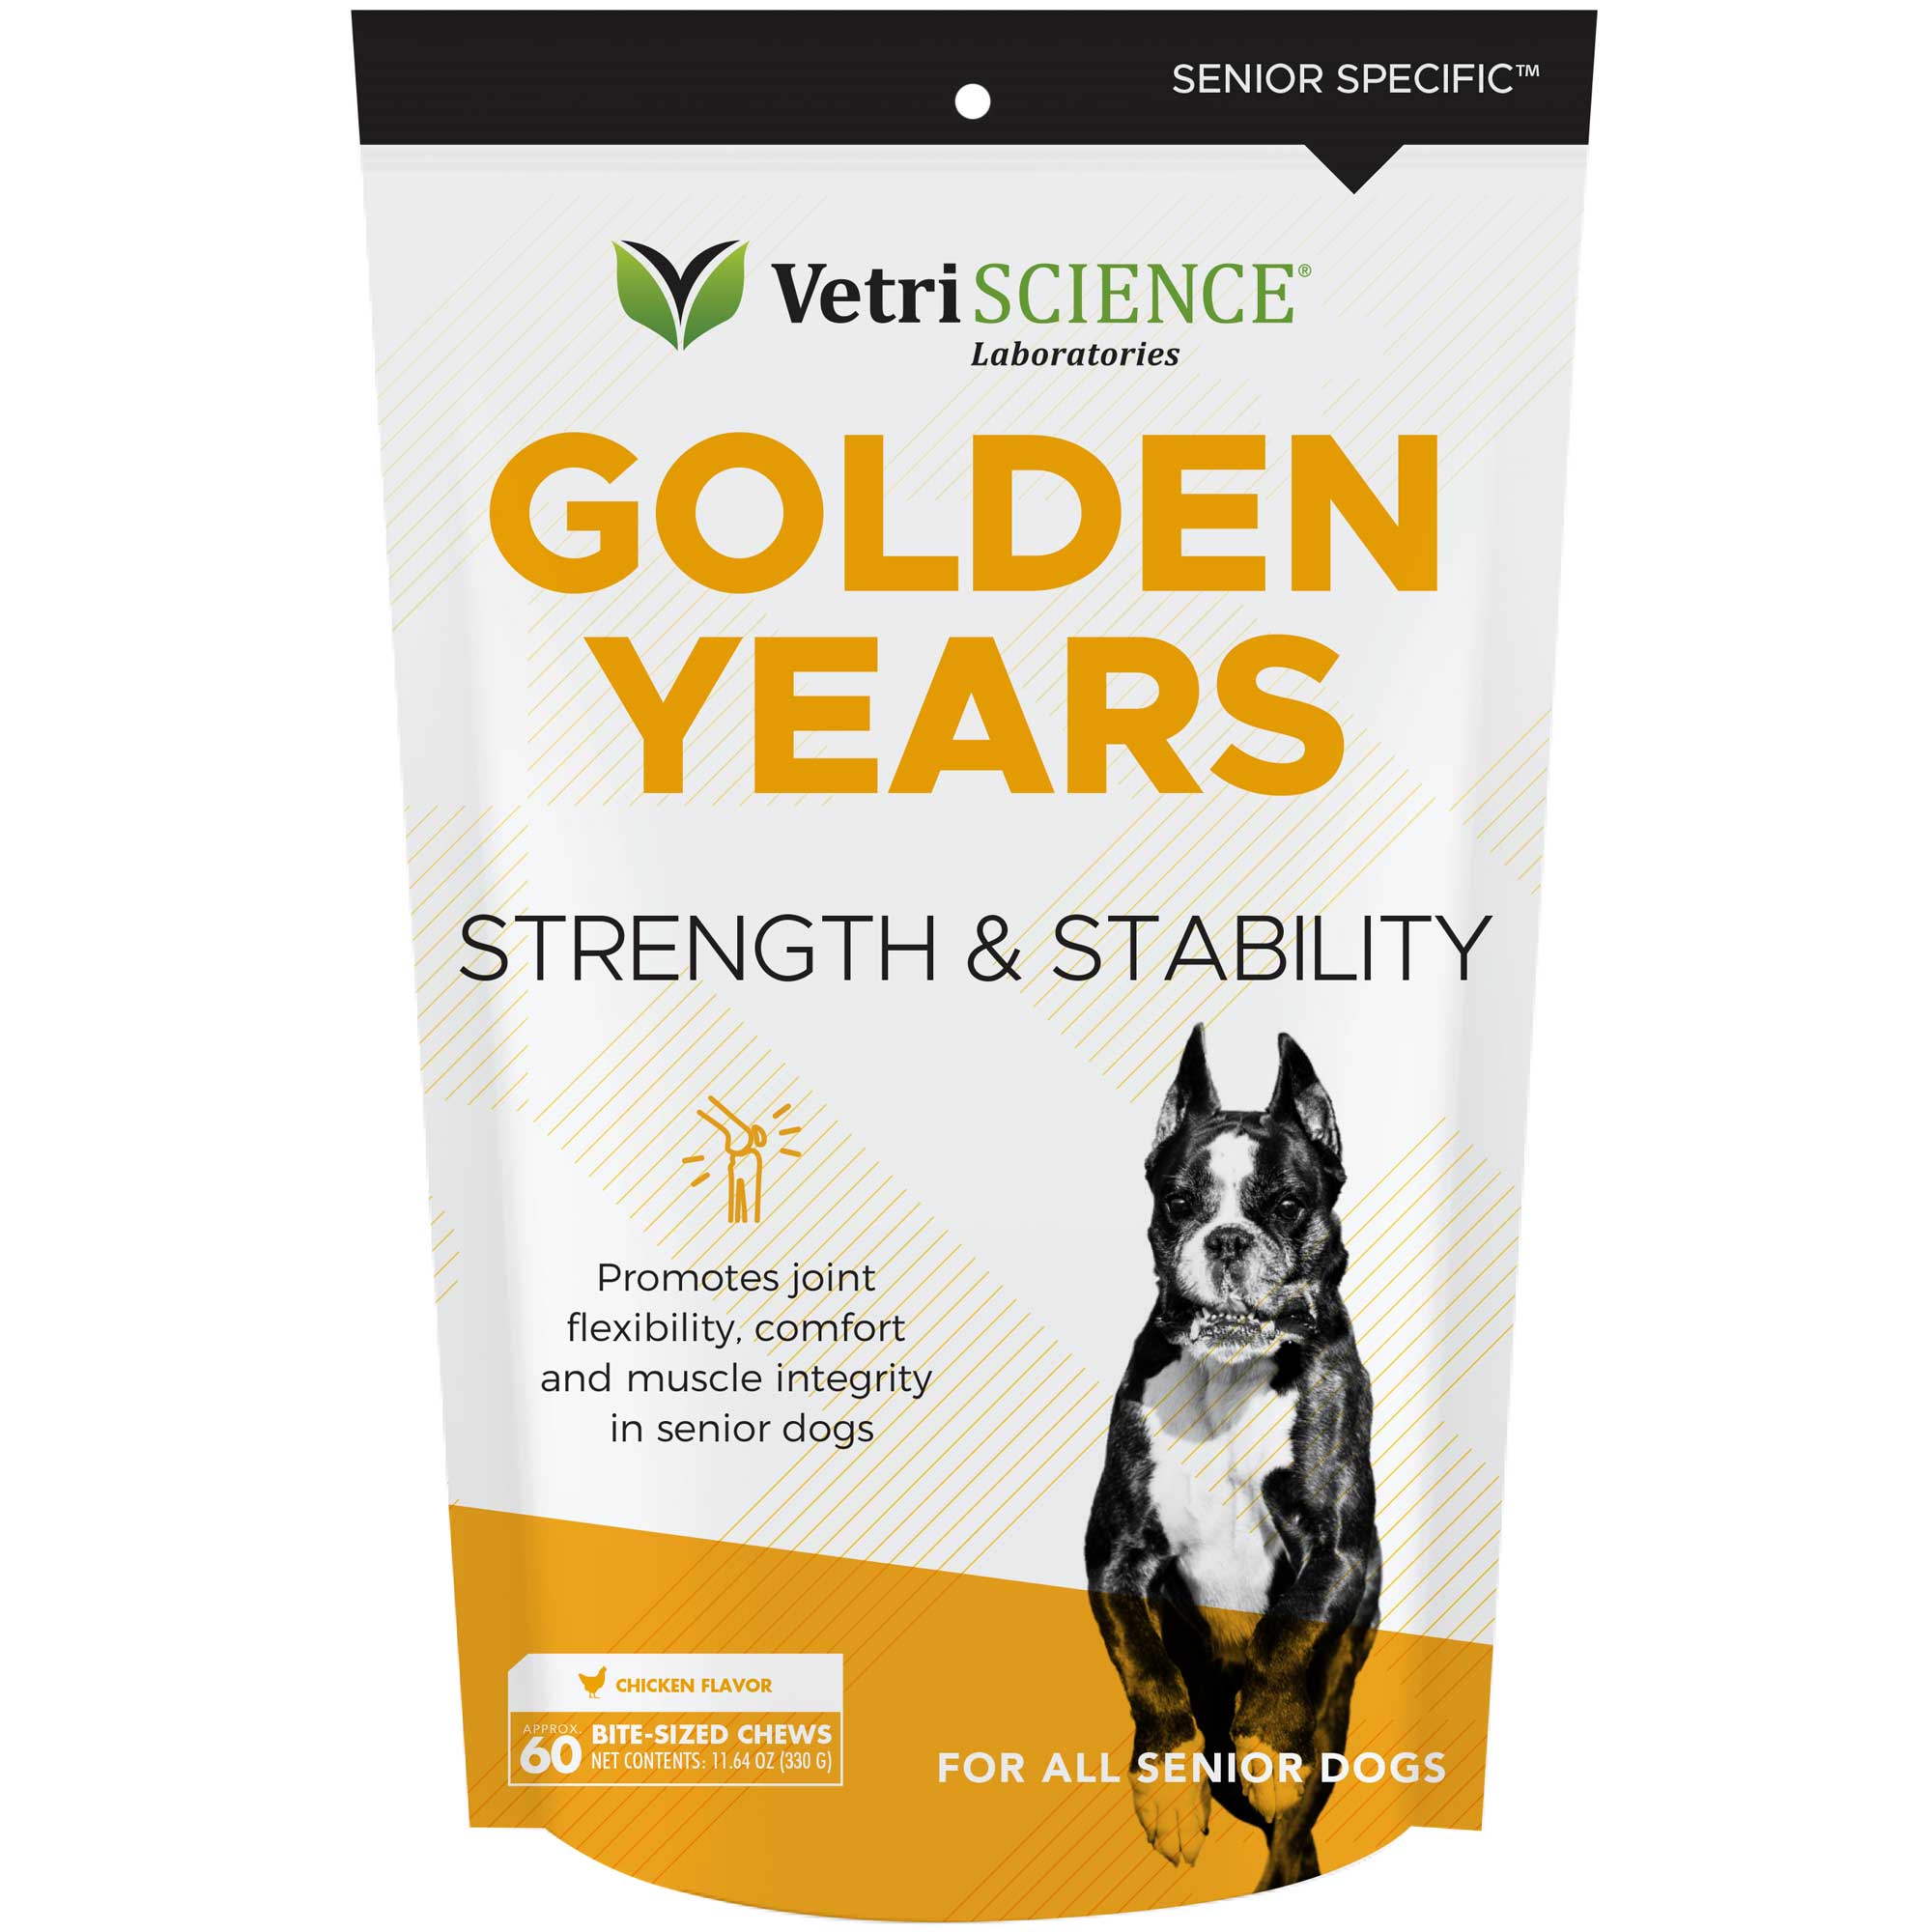 Golden Years Strength & Stability Chews Usage